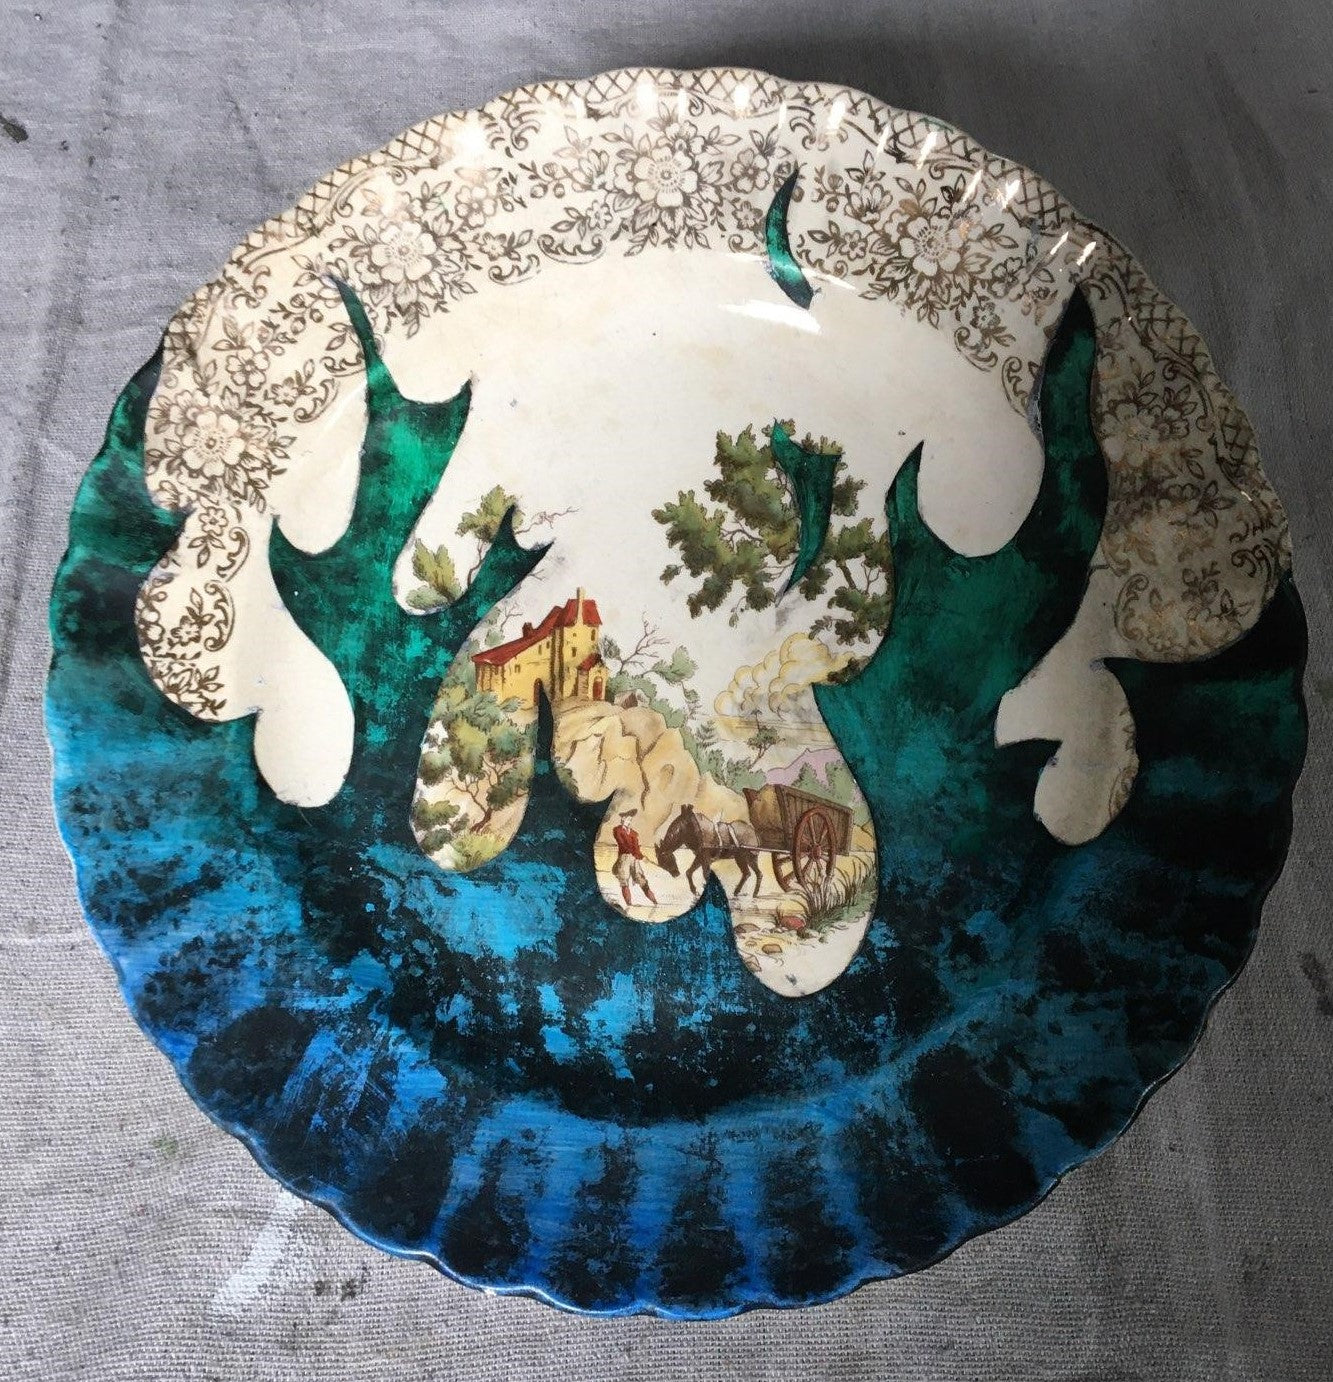 Plate- Culture Collision Series, Iconic Flame Design on Chateau France Vignette, Emerald Green to Sapphire Blue Ombre